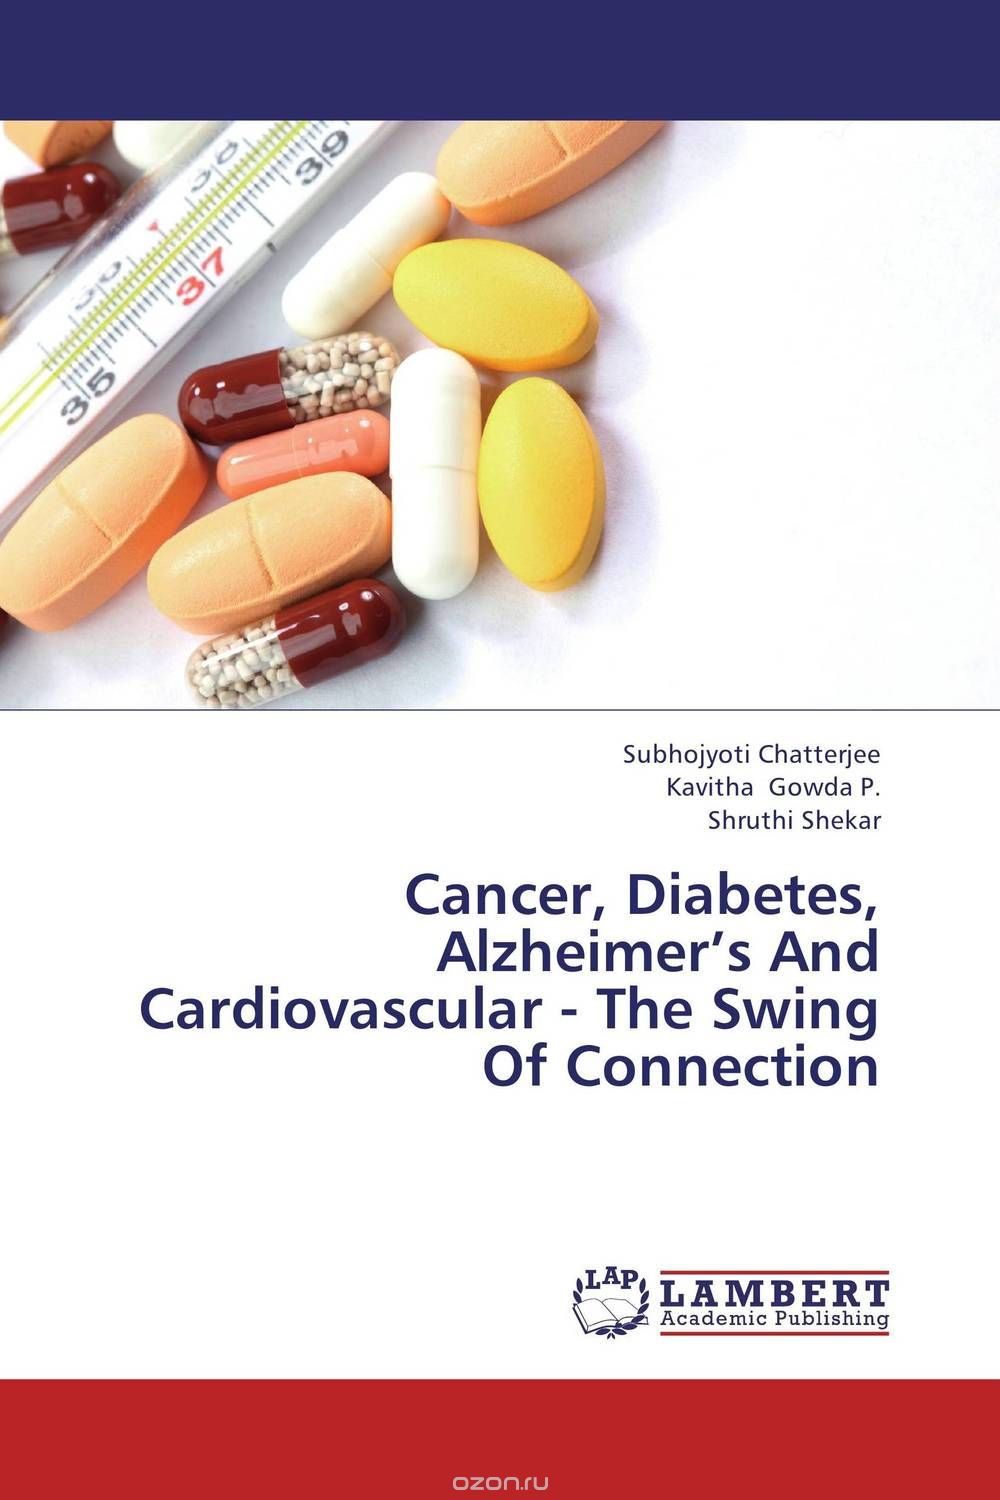 Cancer, Diabetes, Alzheimer’s And Cardiovascular - The Swing Of Connection